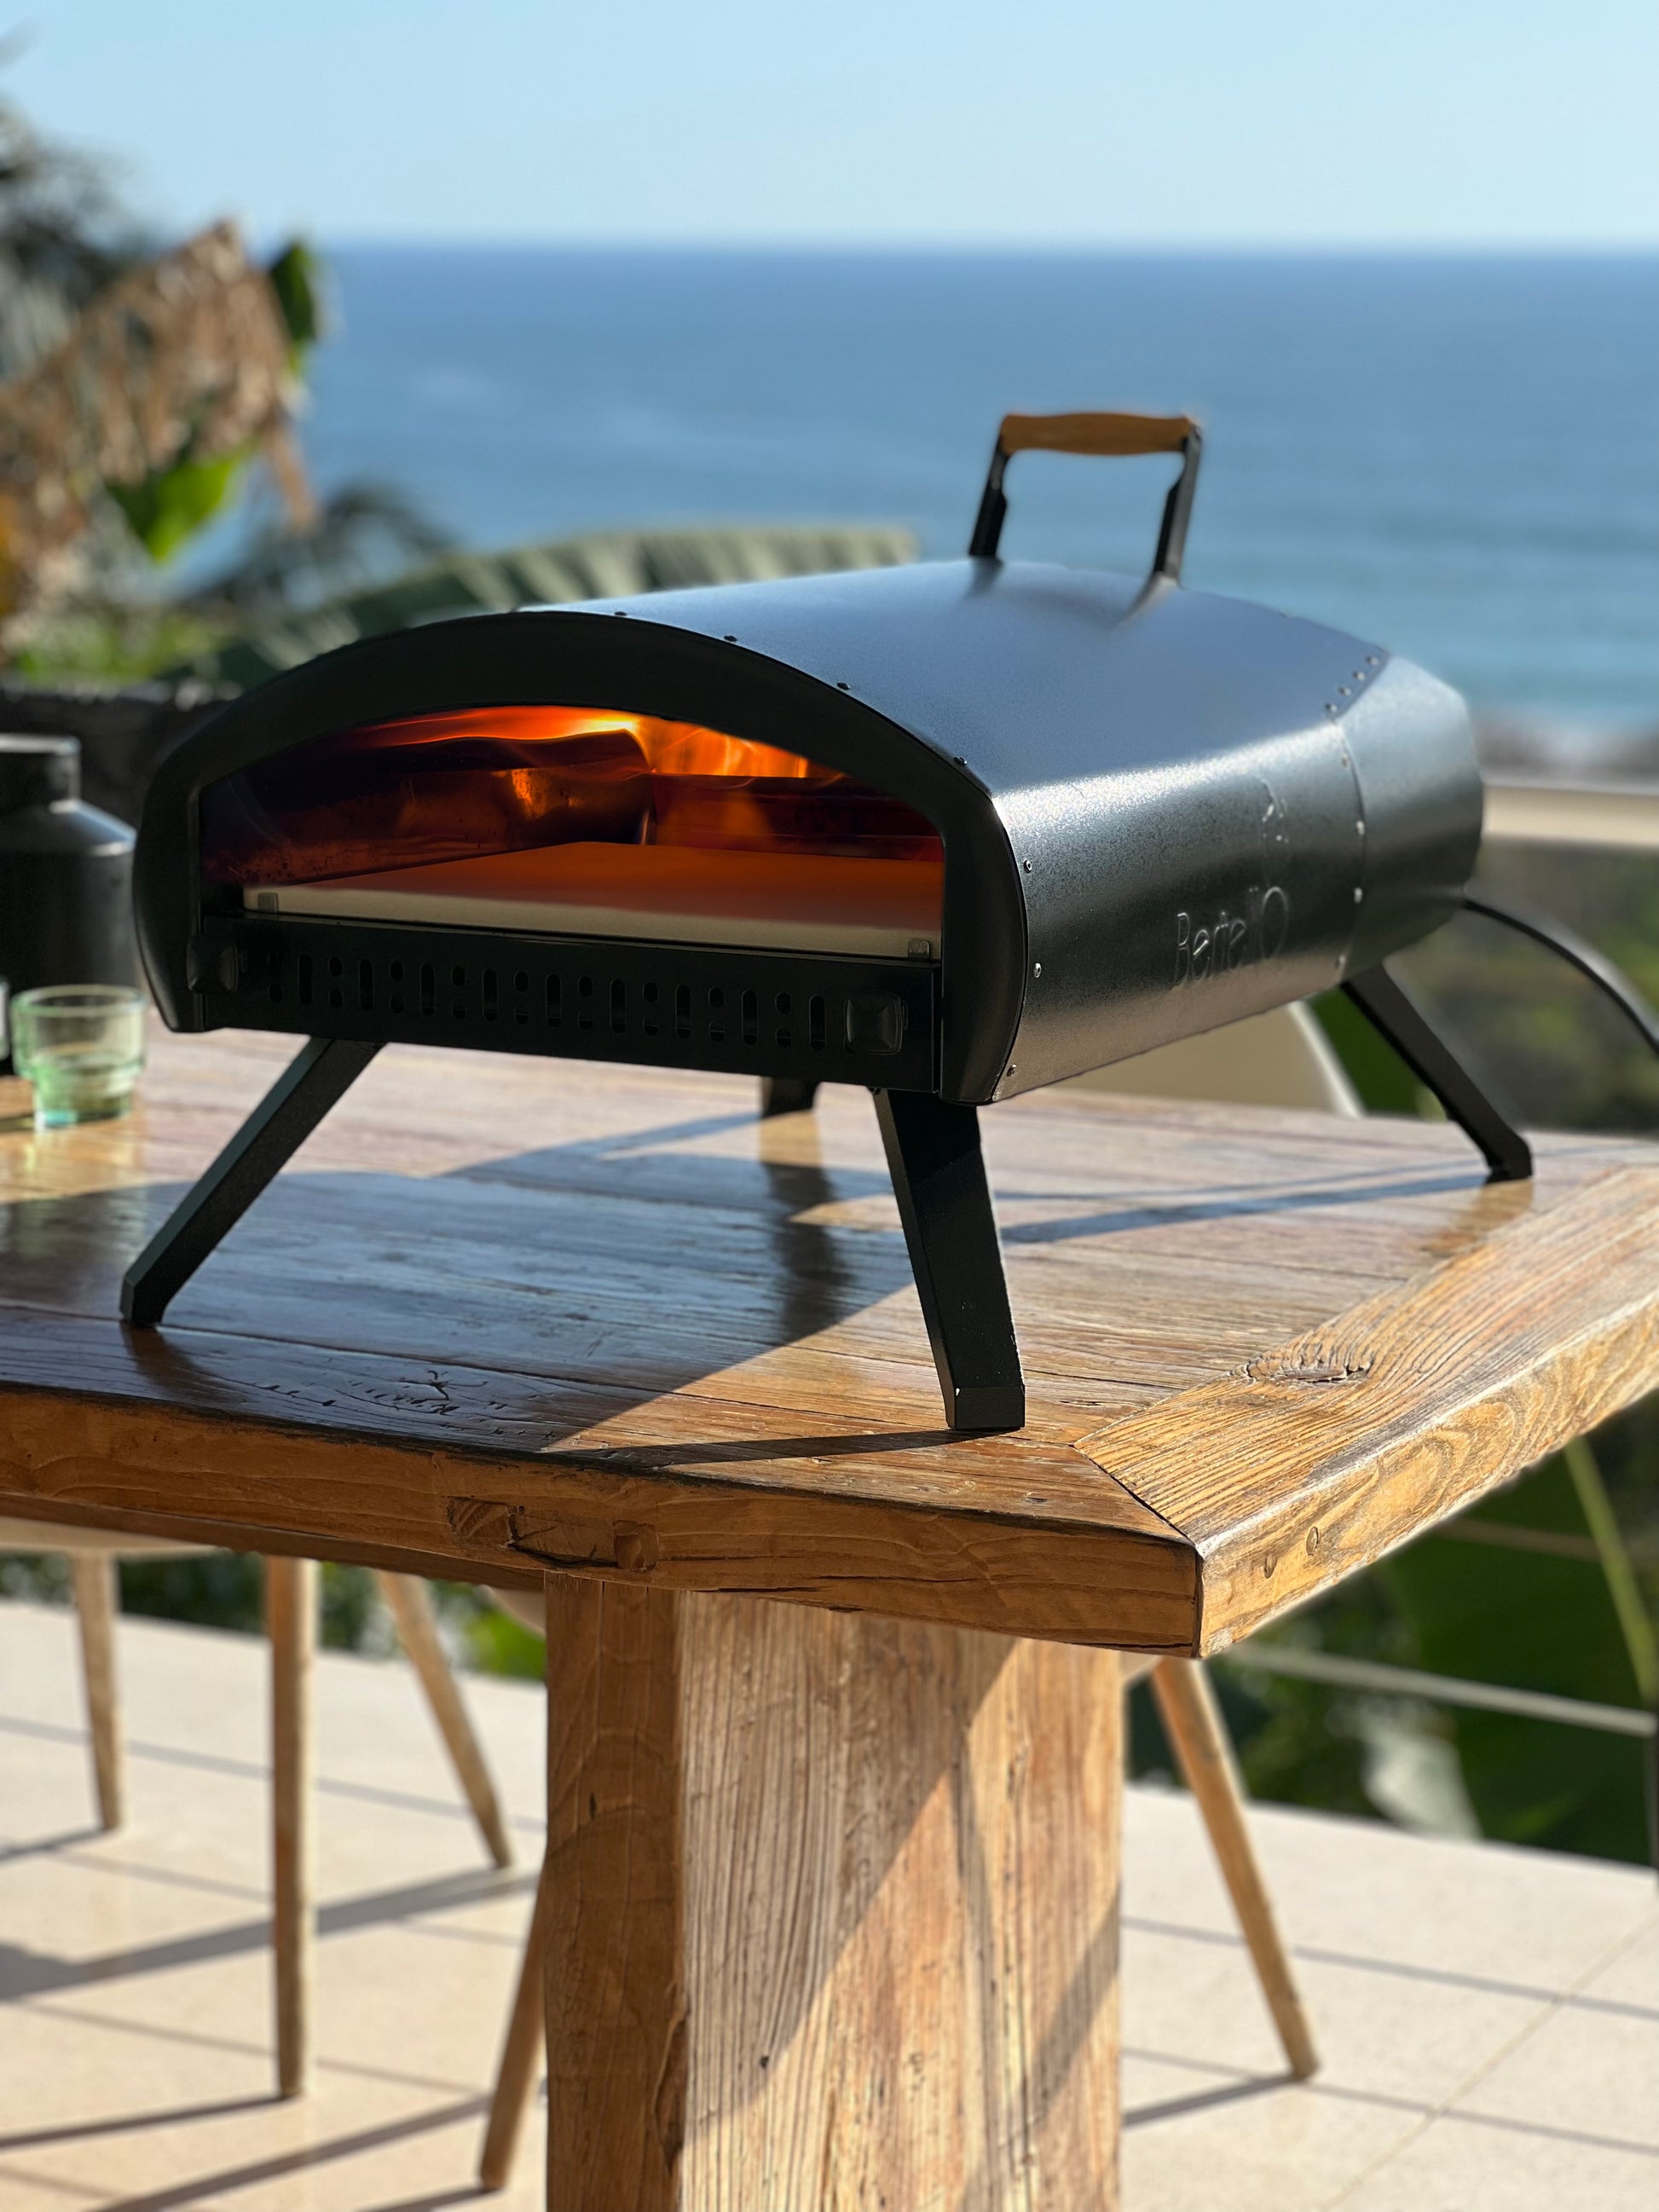 Portable Pizza Oven Cart - Grande C32 - Purchase Online